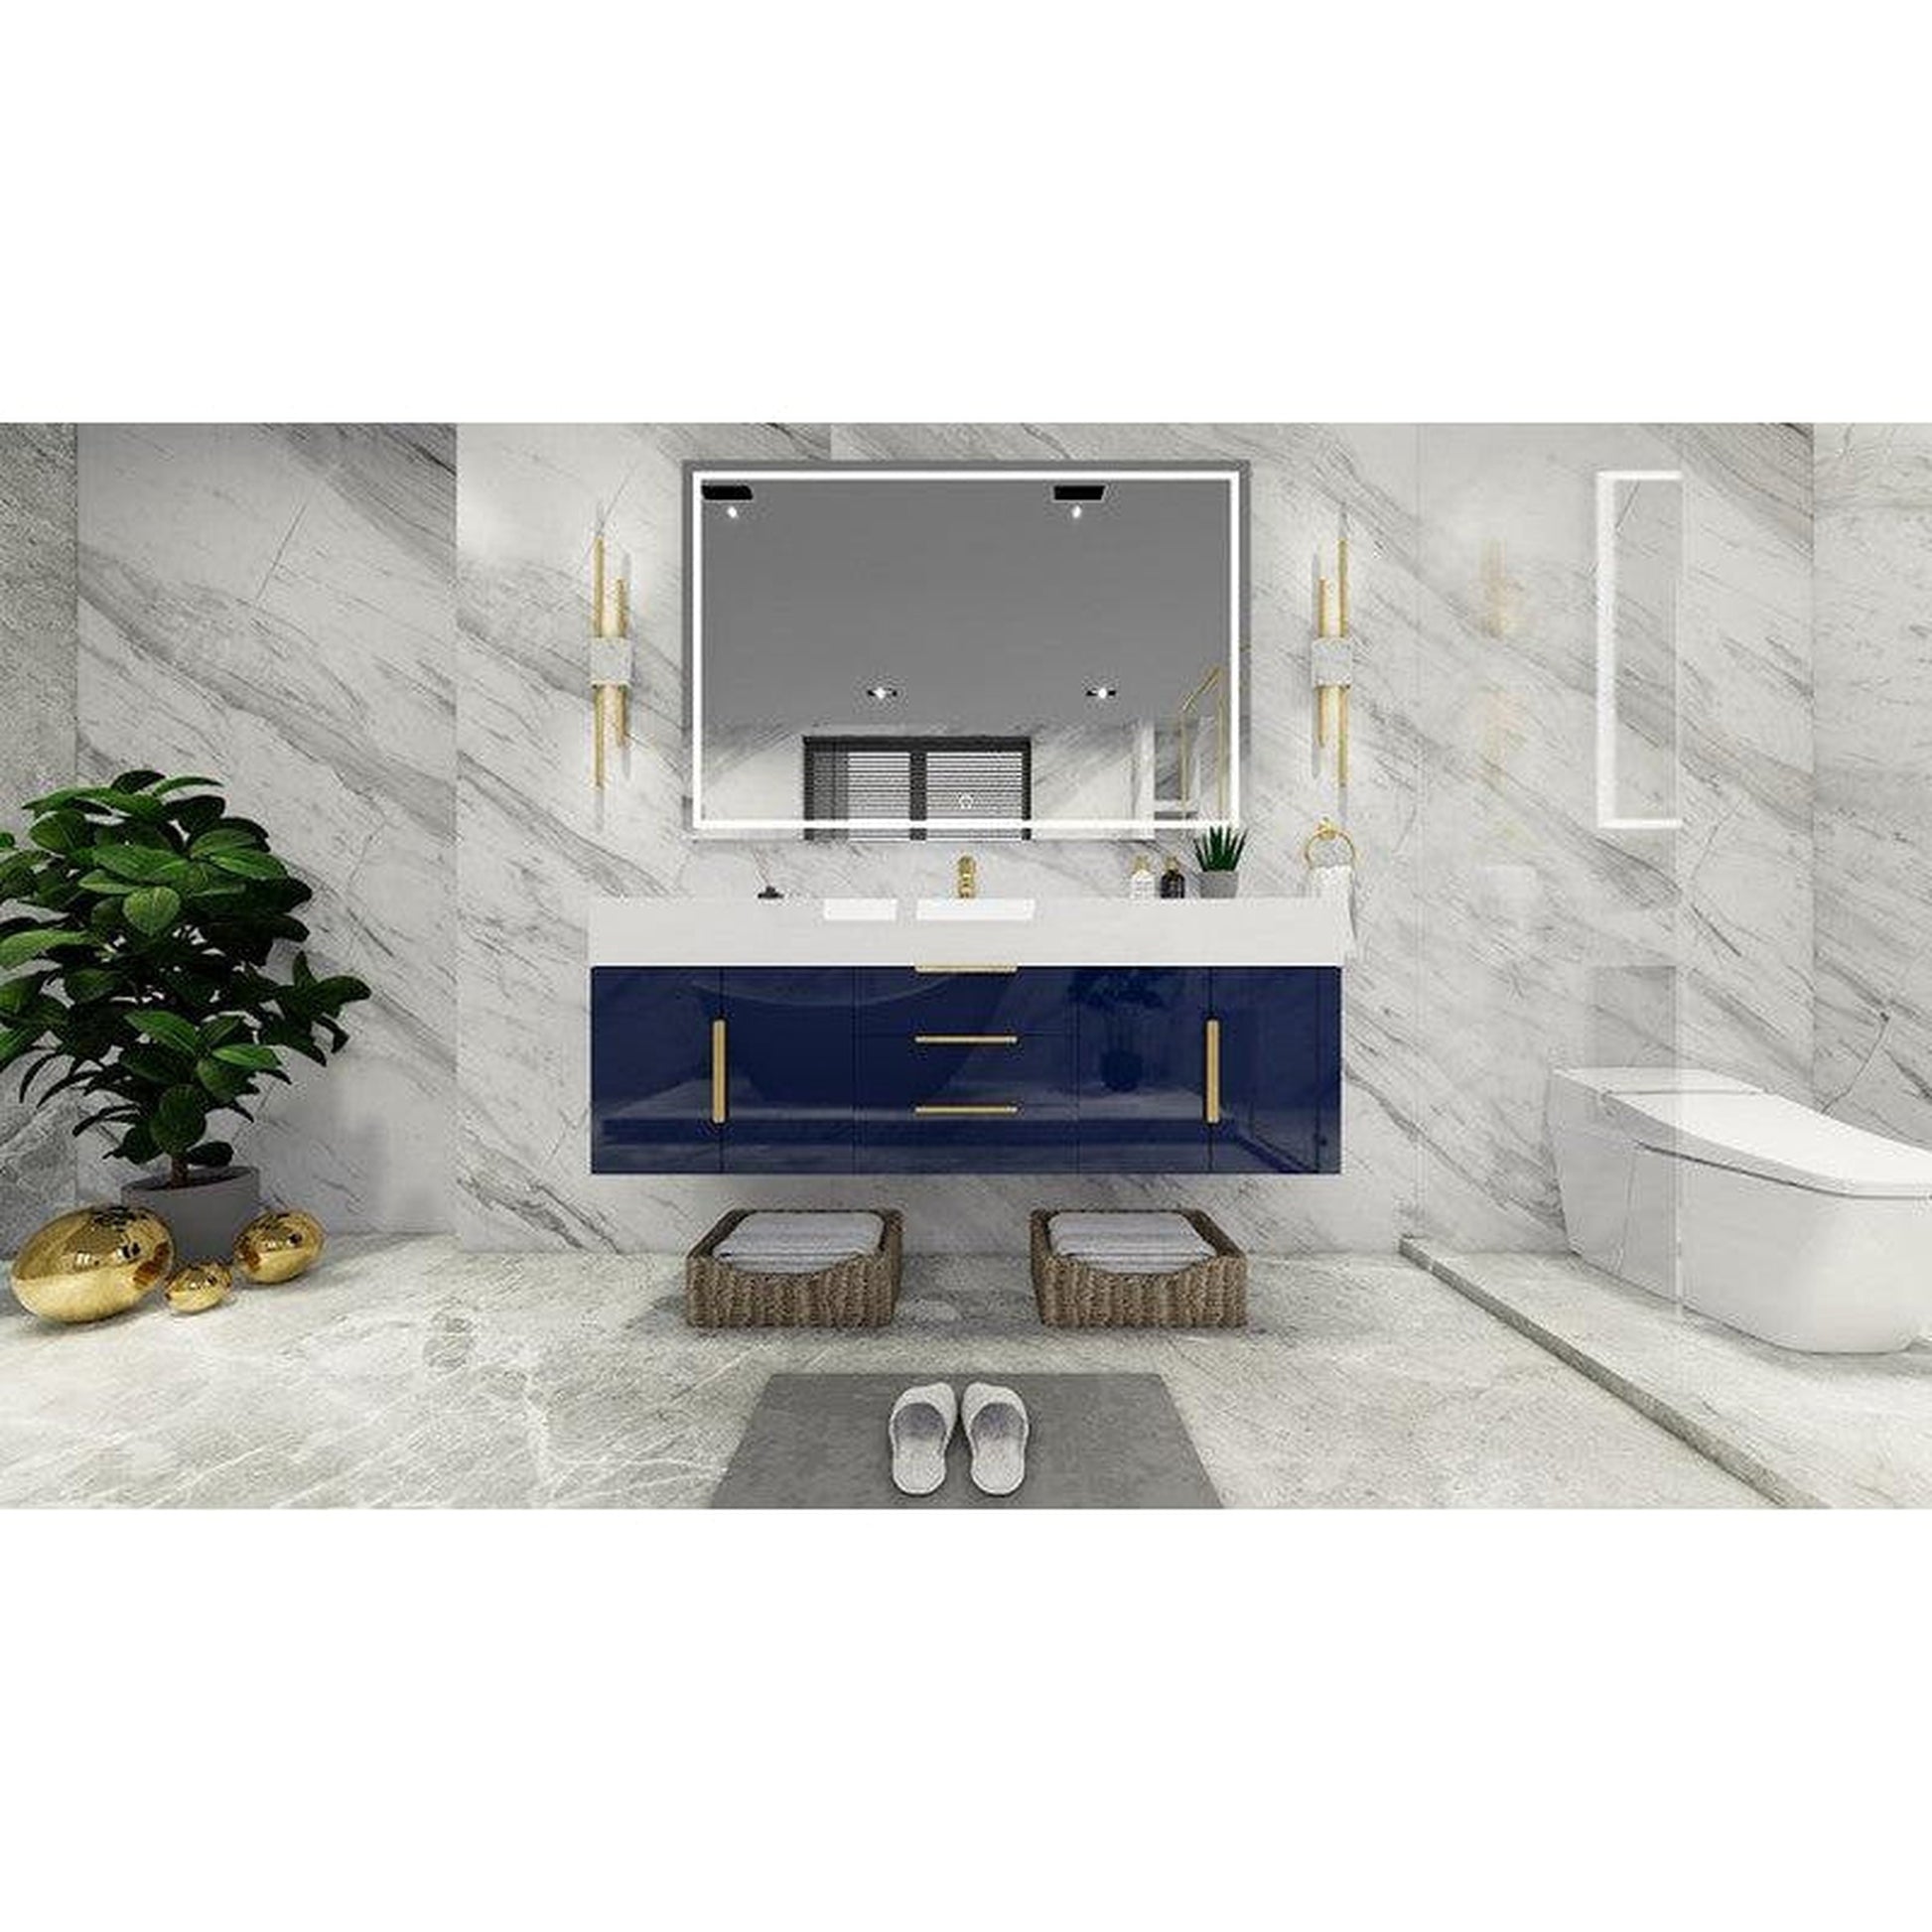 Moreno Bath Bethany 60" High Gloss Night Blue Wall-Mounted Vanity With Single Reinforced White Acrylic Sink